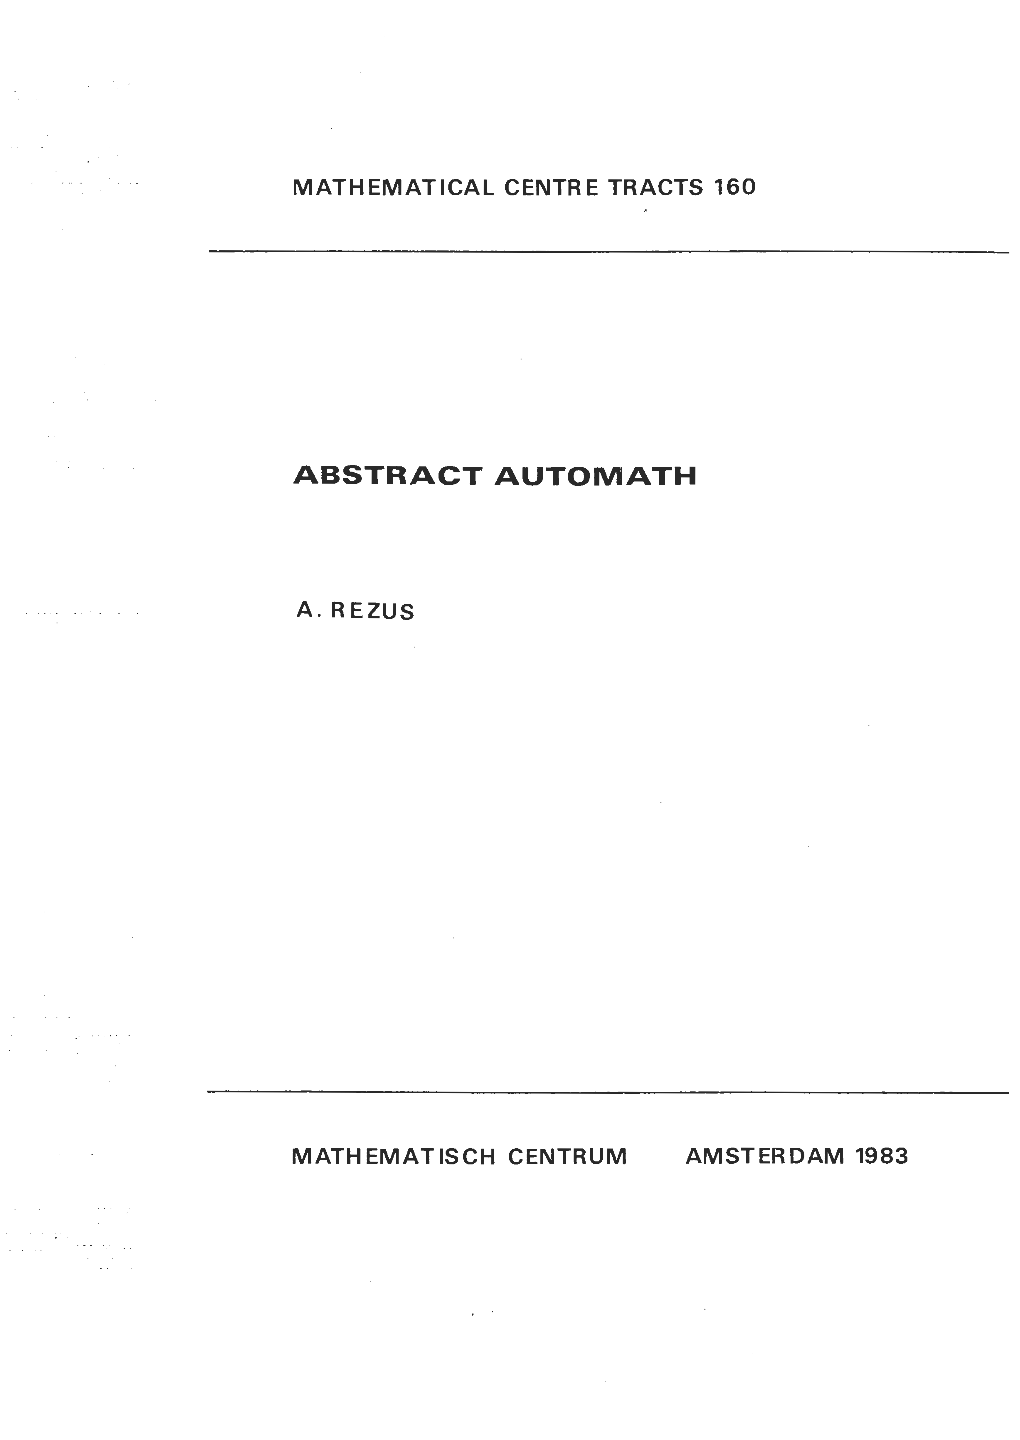 Abstract Automath